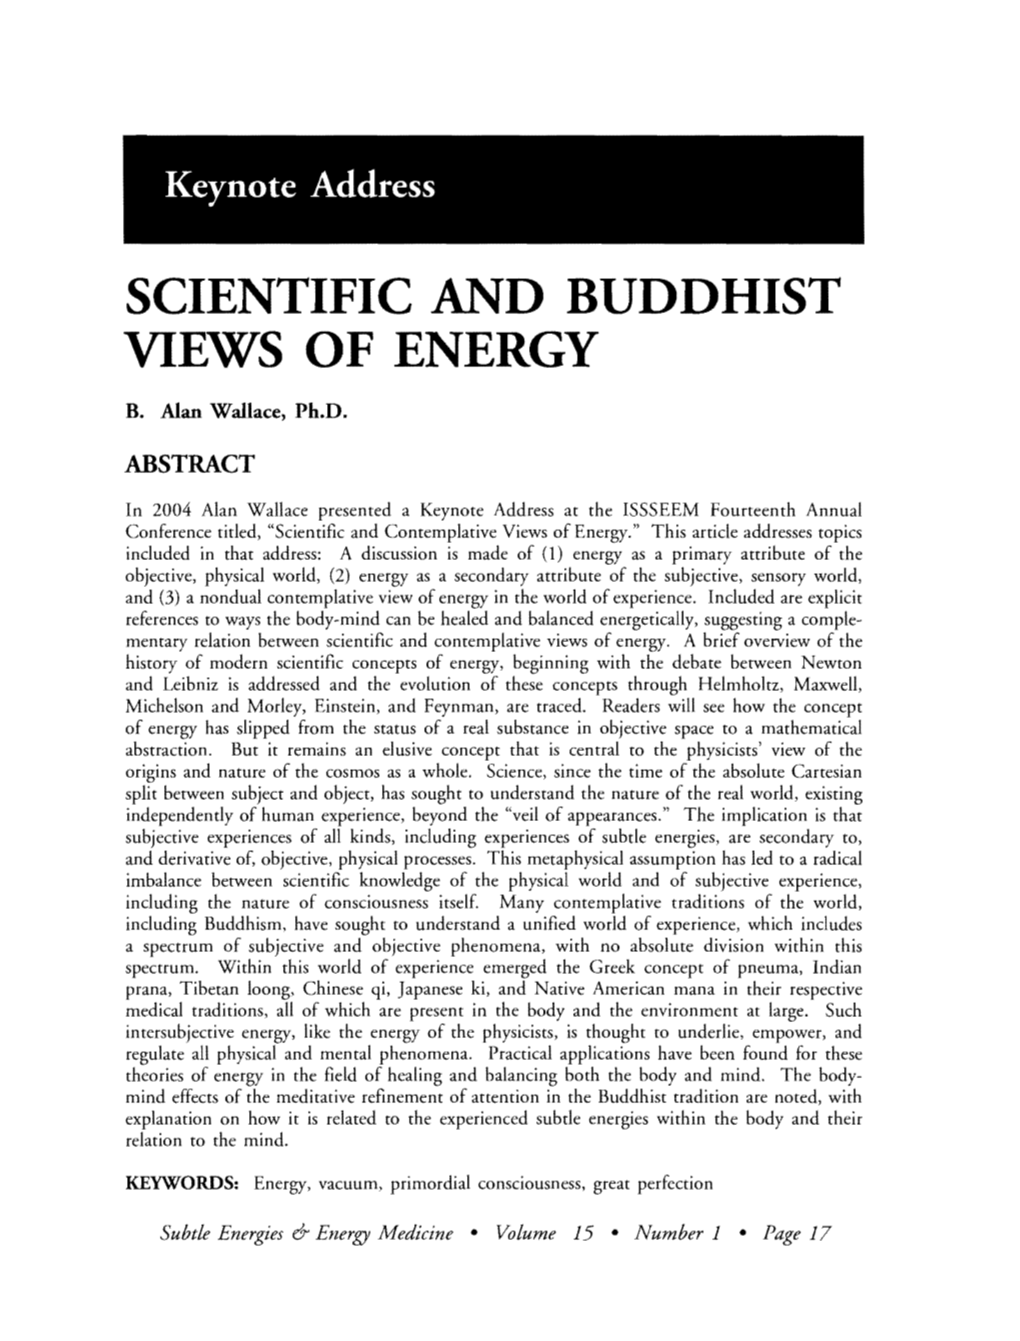 Scientific and Buddhist Views of Energy